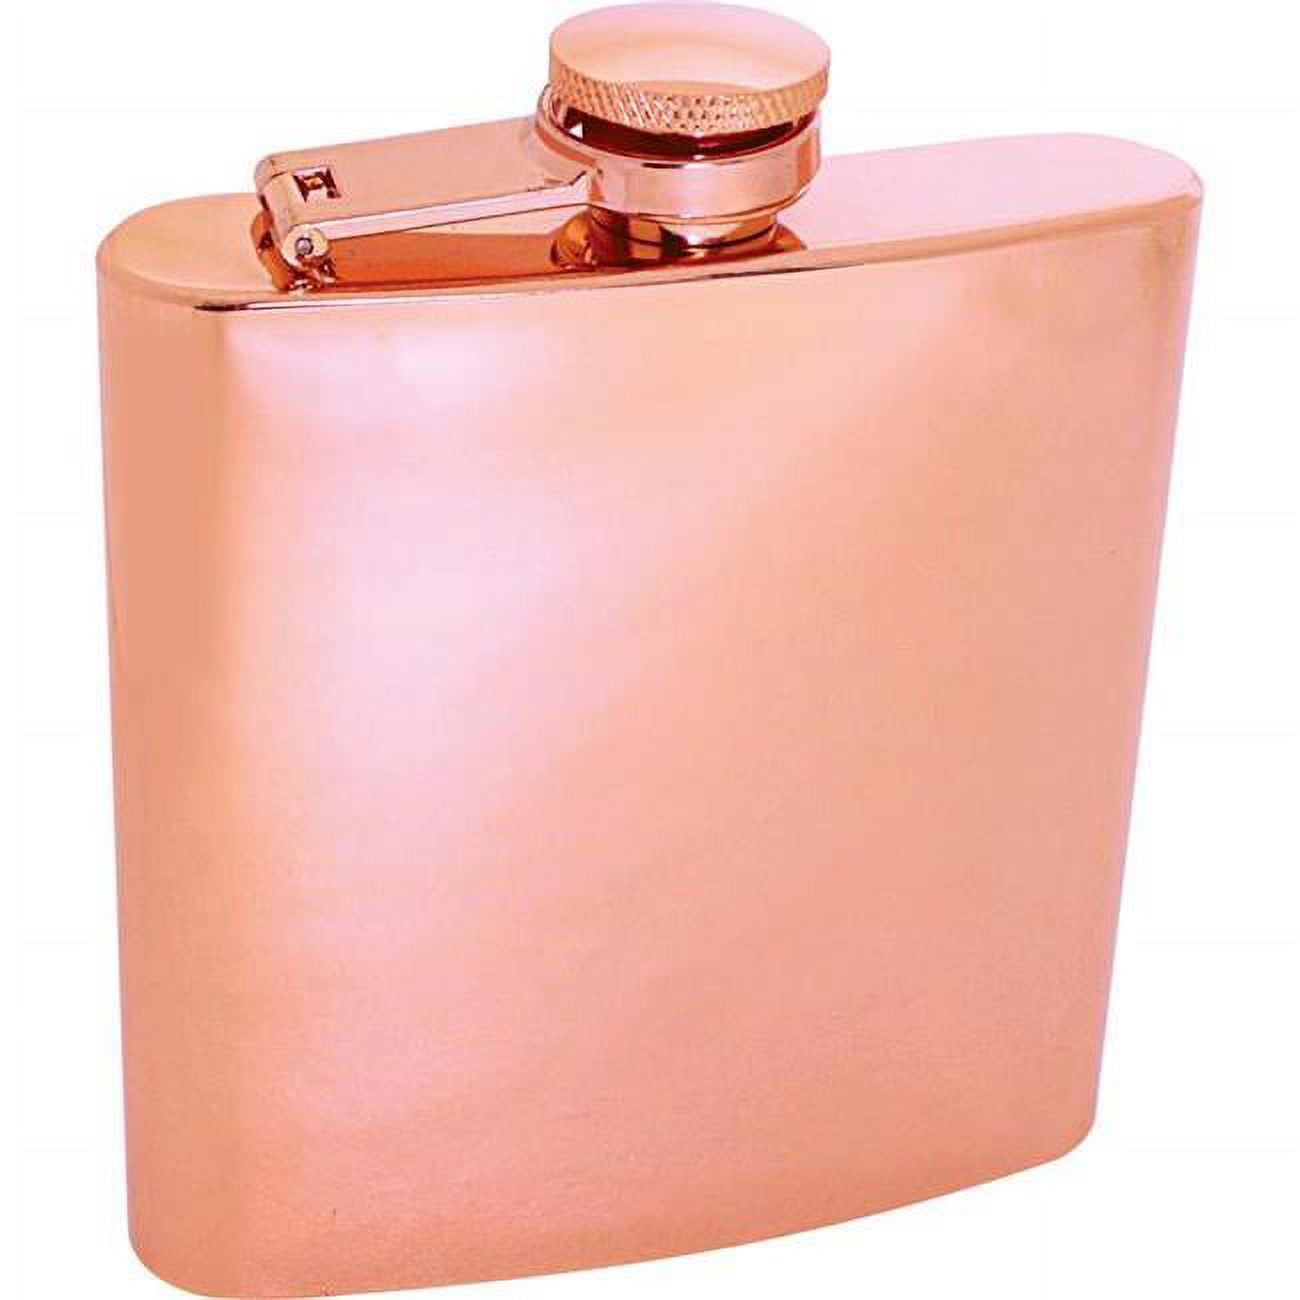 6 Oz Copper-tone Plated Stainless Steel Flask